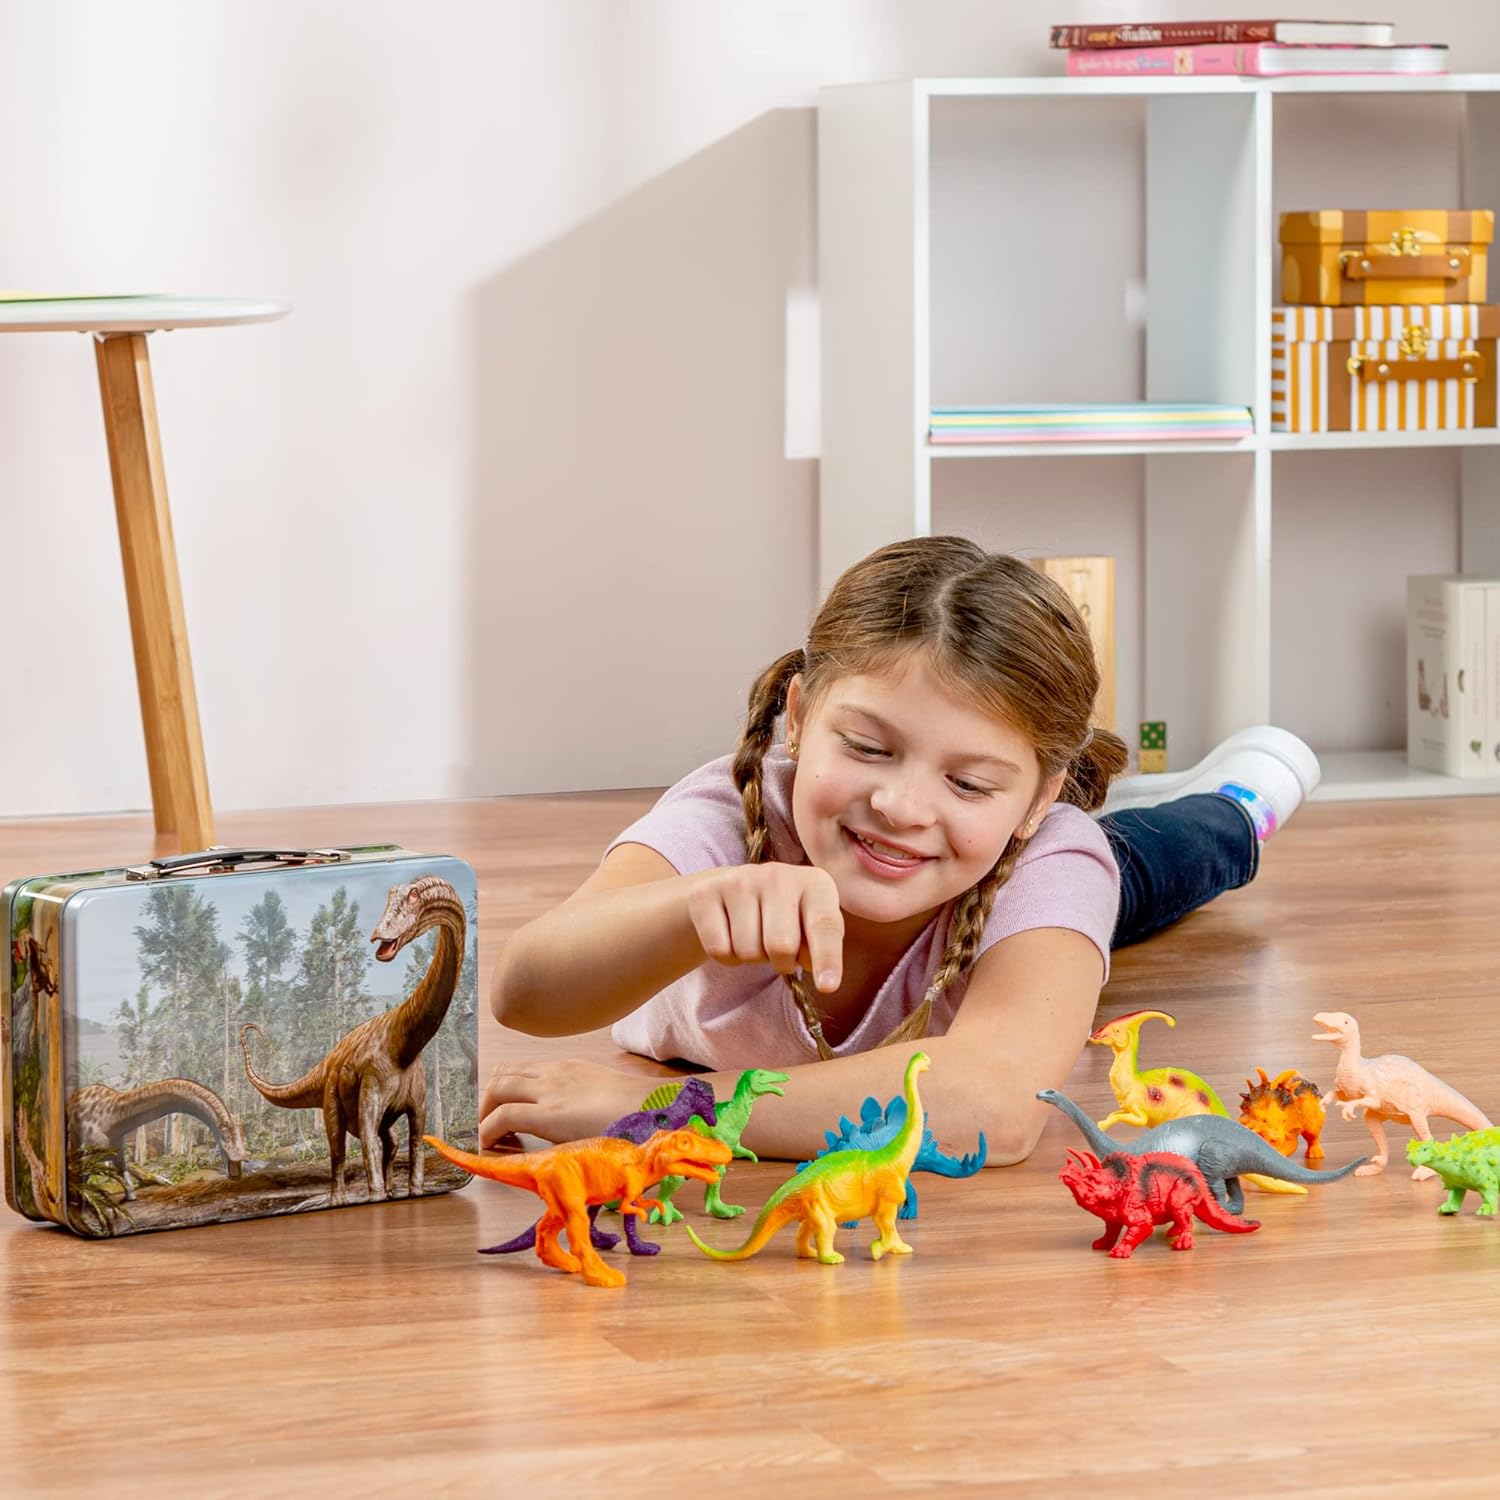 PLAYBEA Dinosaur Toys - 12 7-Inch Realistic Dinosaurs Figures with Storage Box |Dino Toys for Kids 3-5 5-7 | Toddler Boy Toys